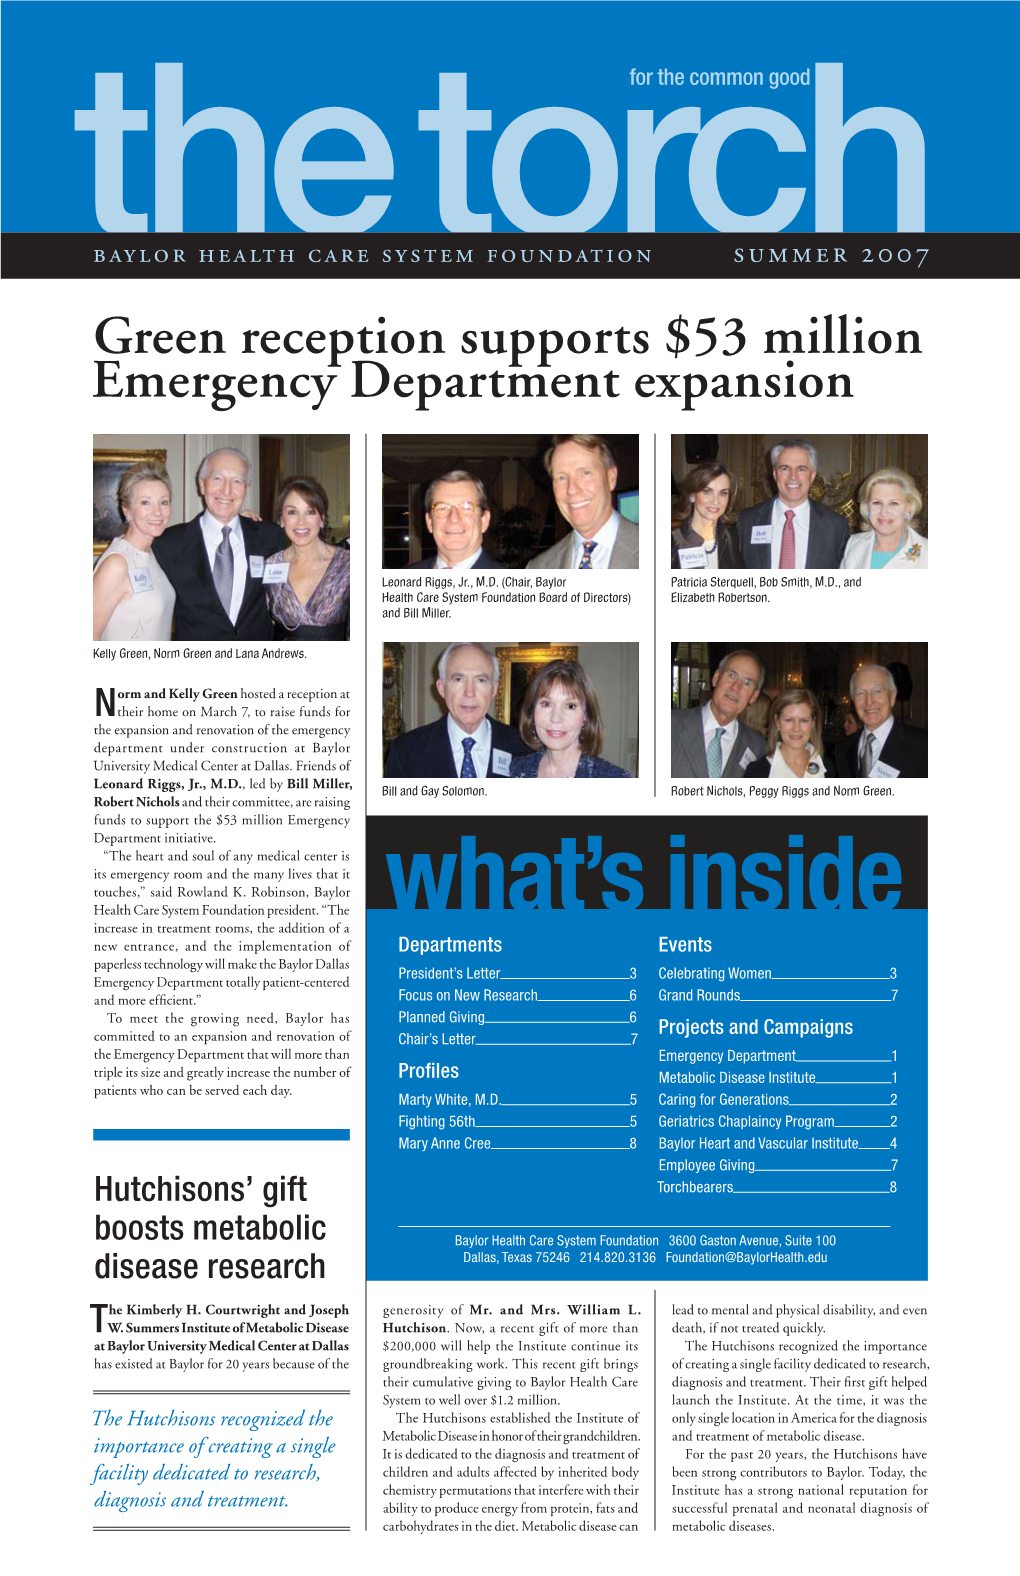 Green Reception Supports $53 Million Emergency Department Expansion